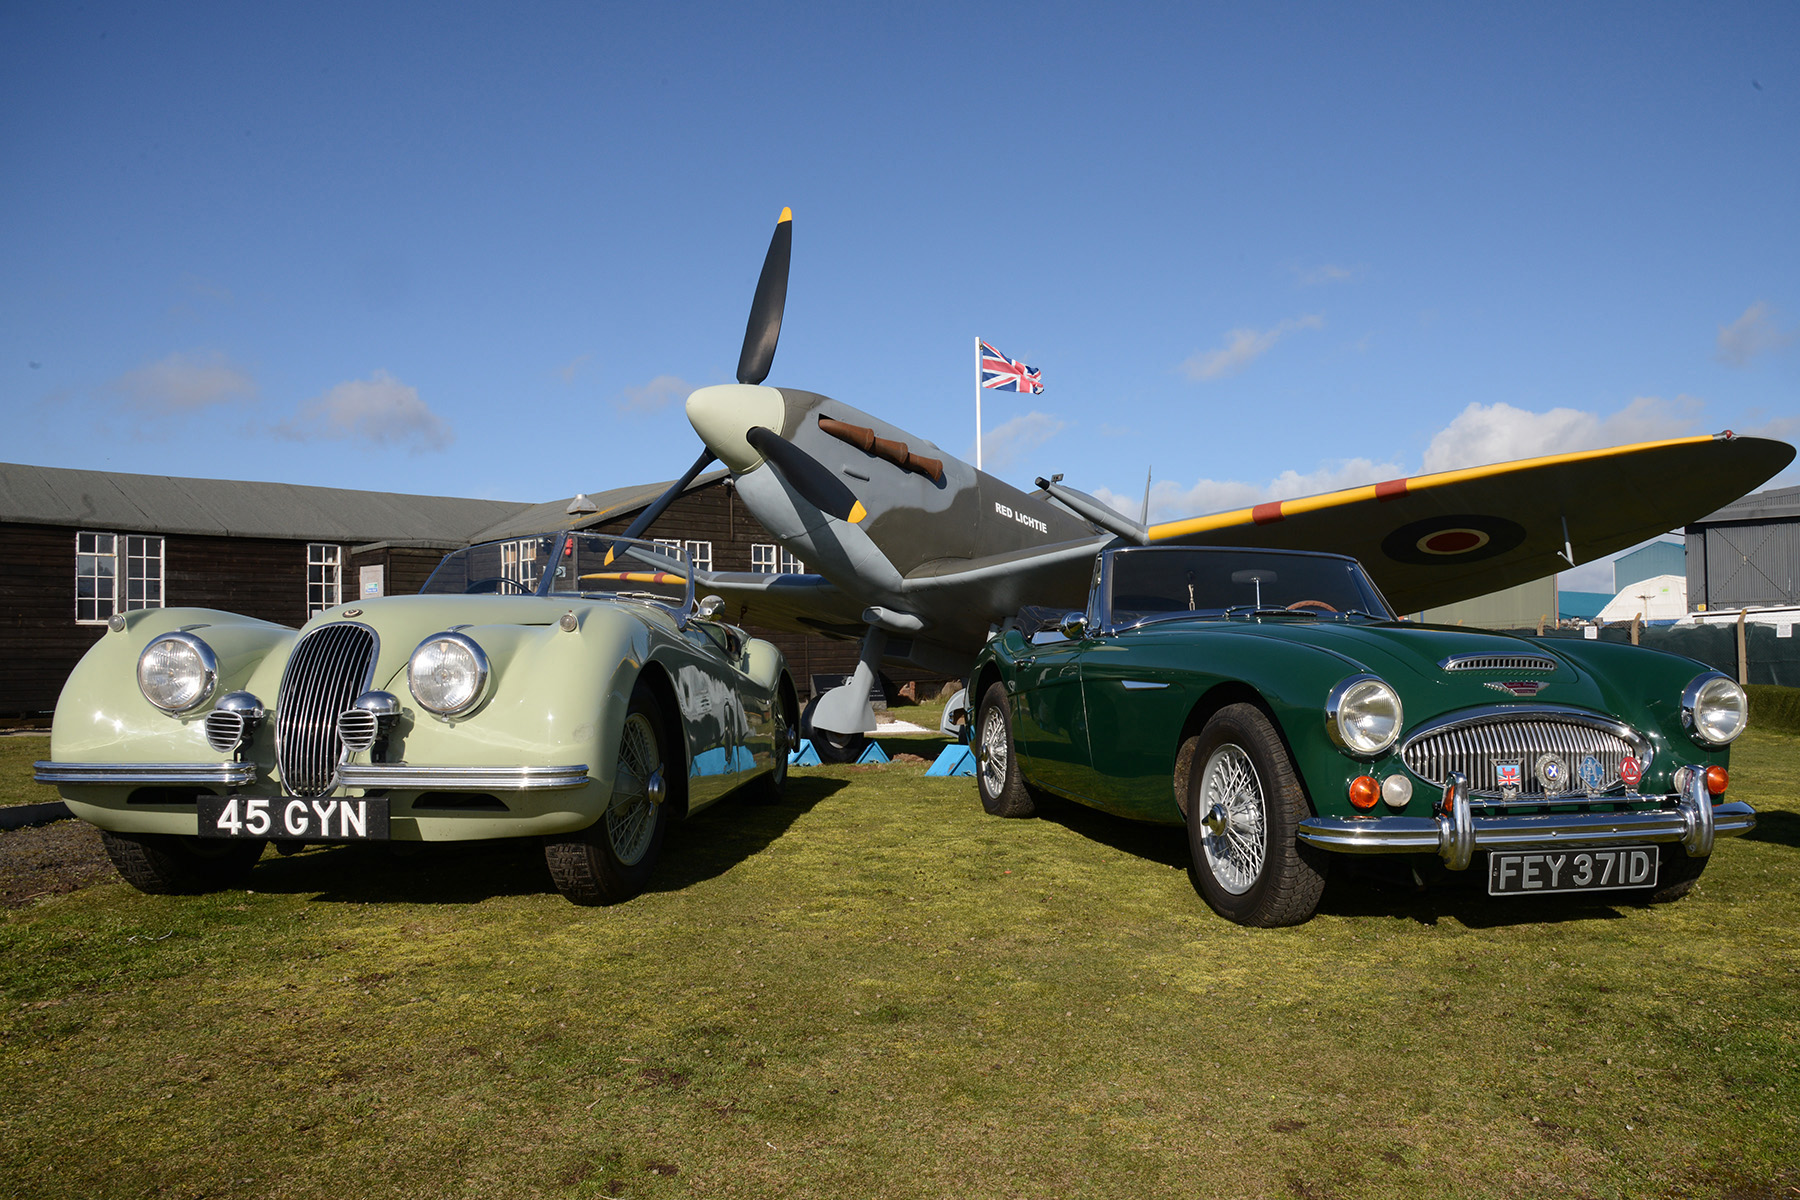 Richard Burton's Jaguar XK120 and an Austin Healey 3000 alongside the Red Lichtie replica Spitfire at Montrose in 2019